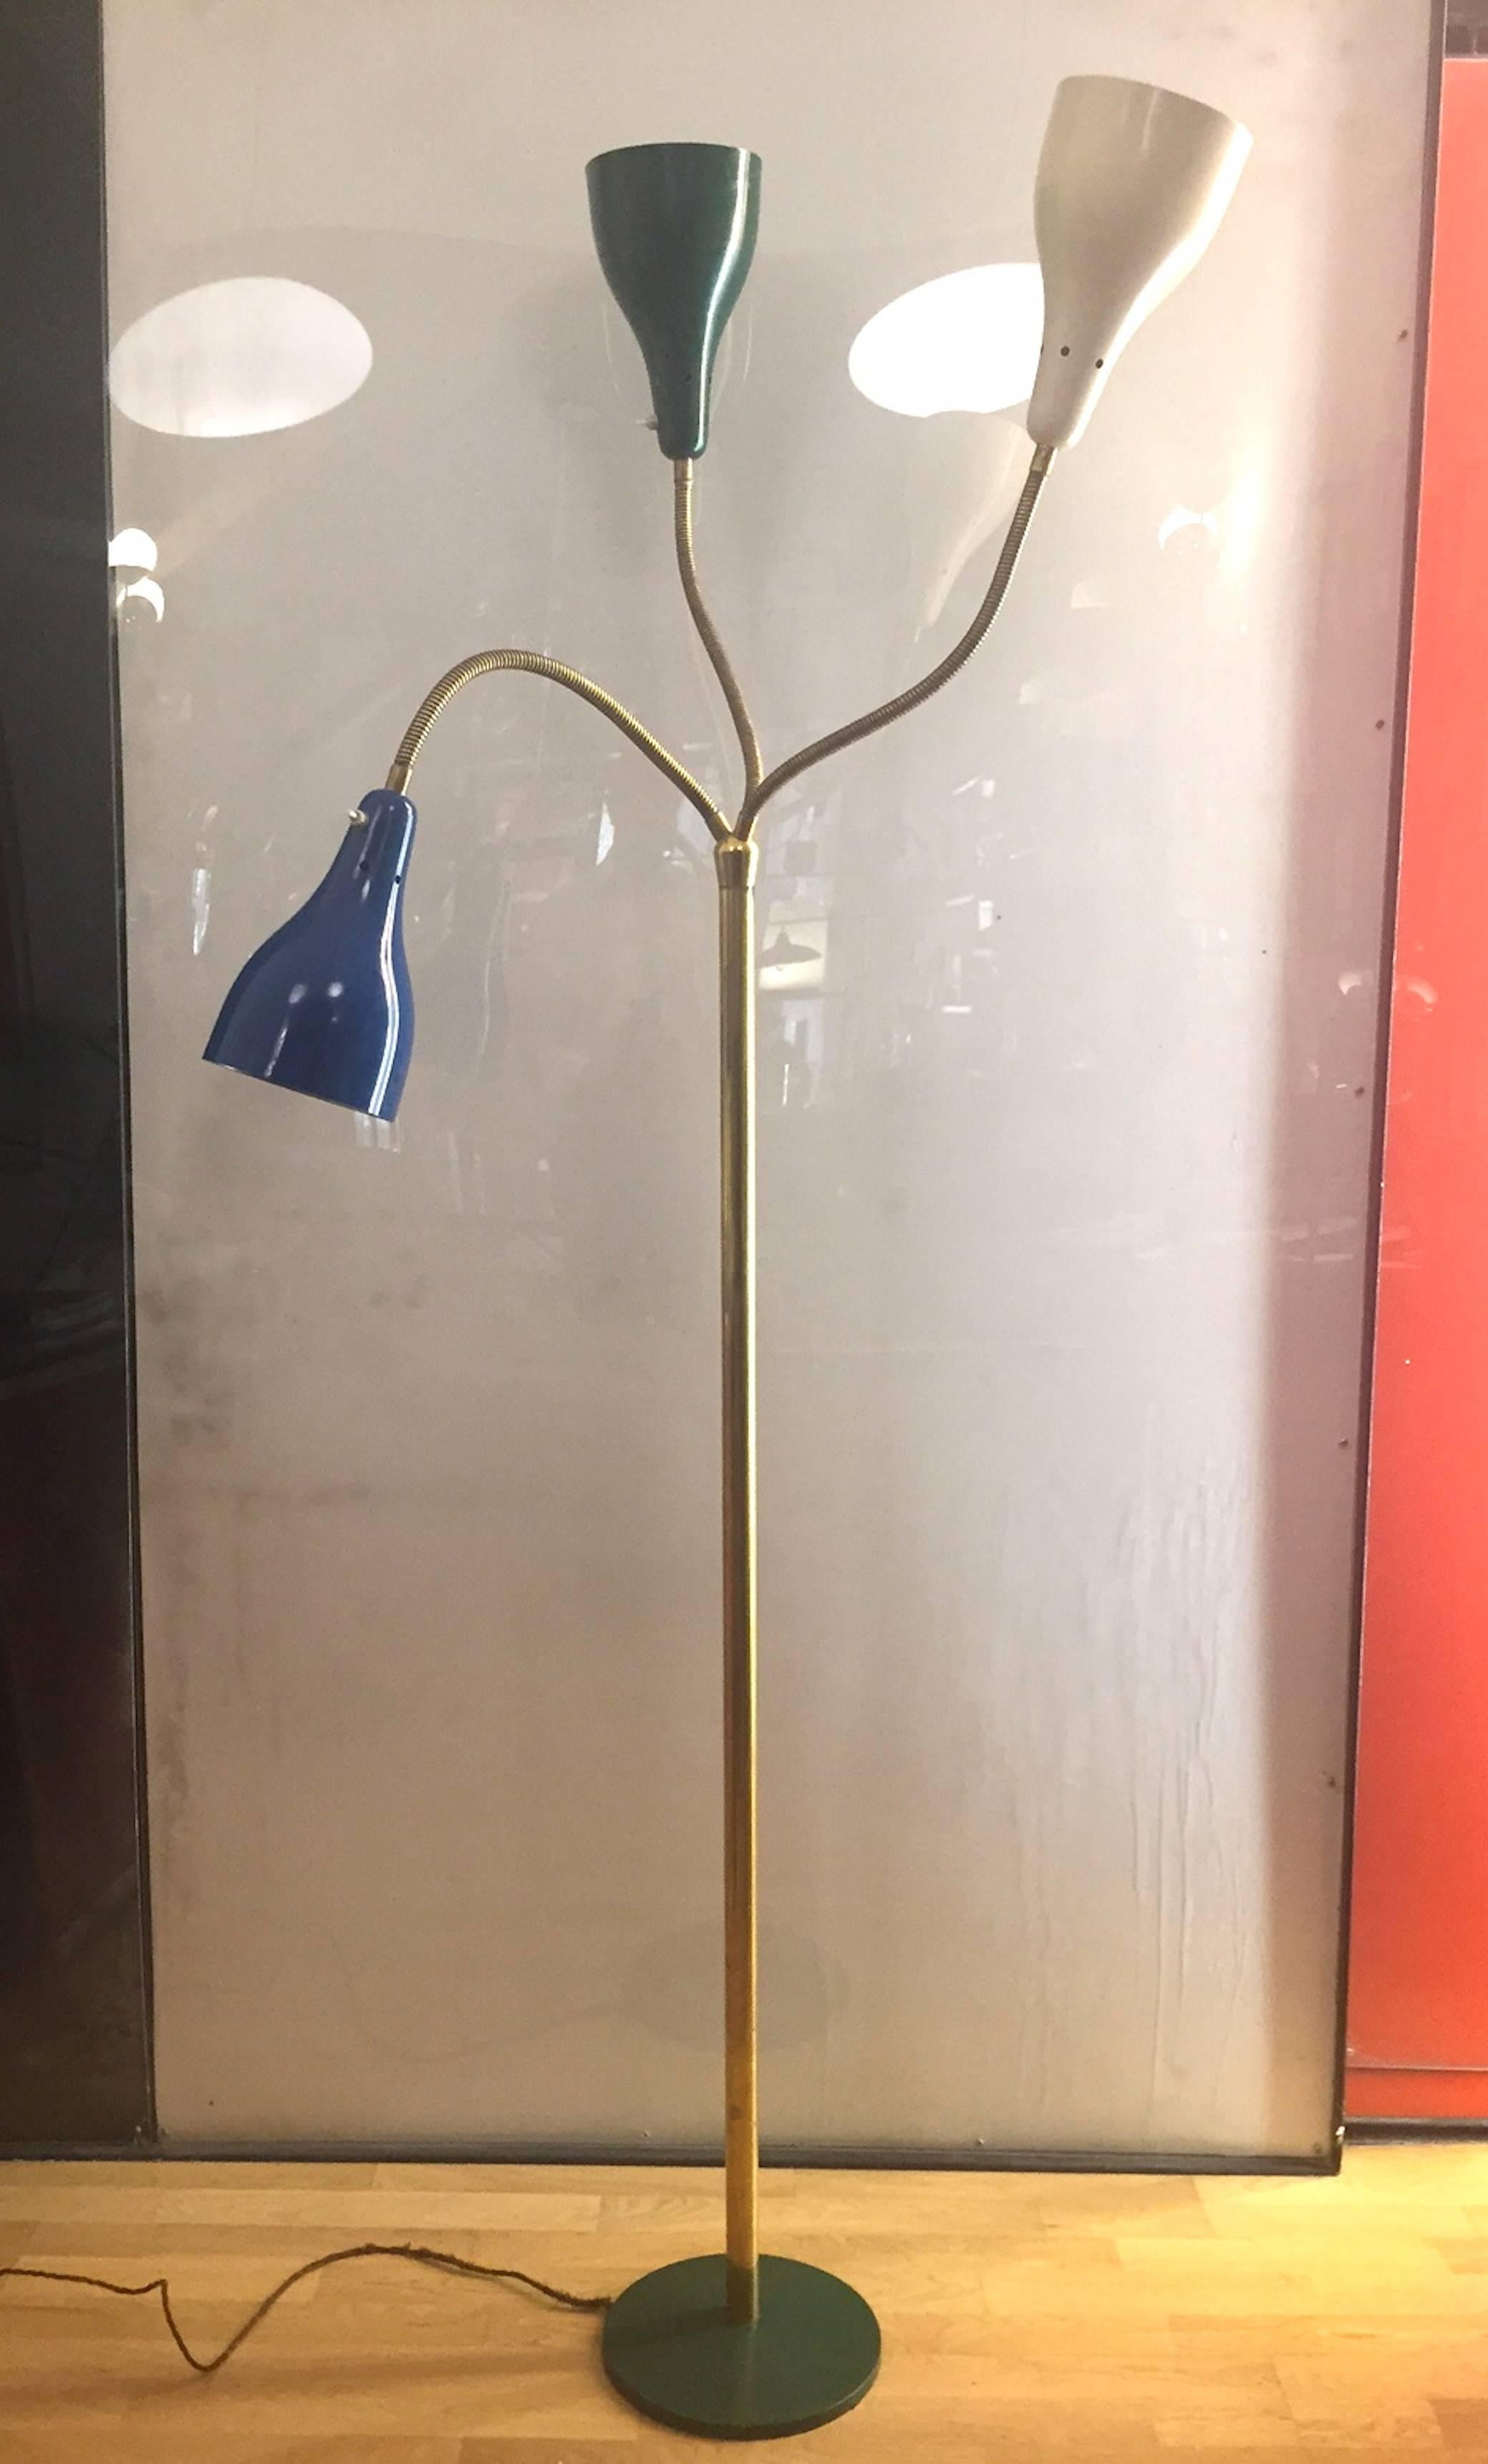 An original Italian floor lamp manufactured in the 1950s.Brass and enameled aluminium. Tress colored shades.
Excellent condition.